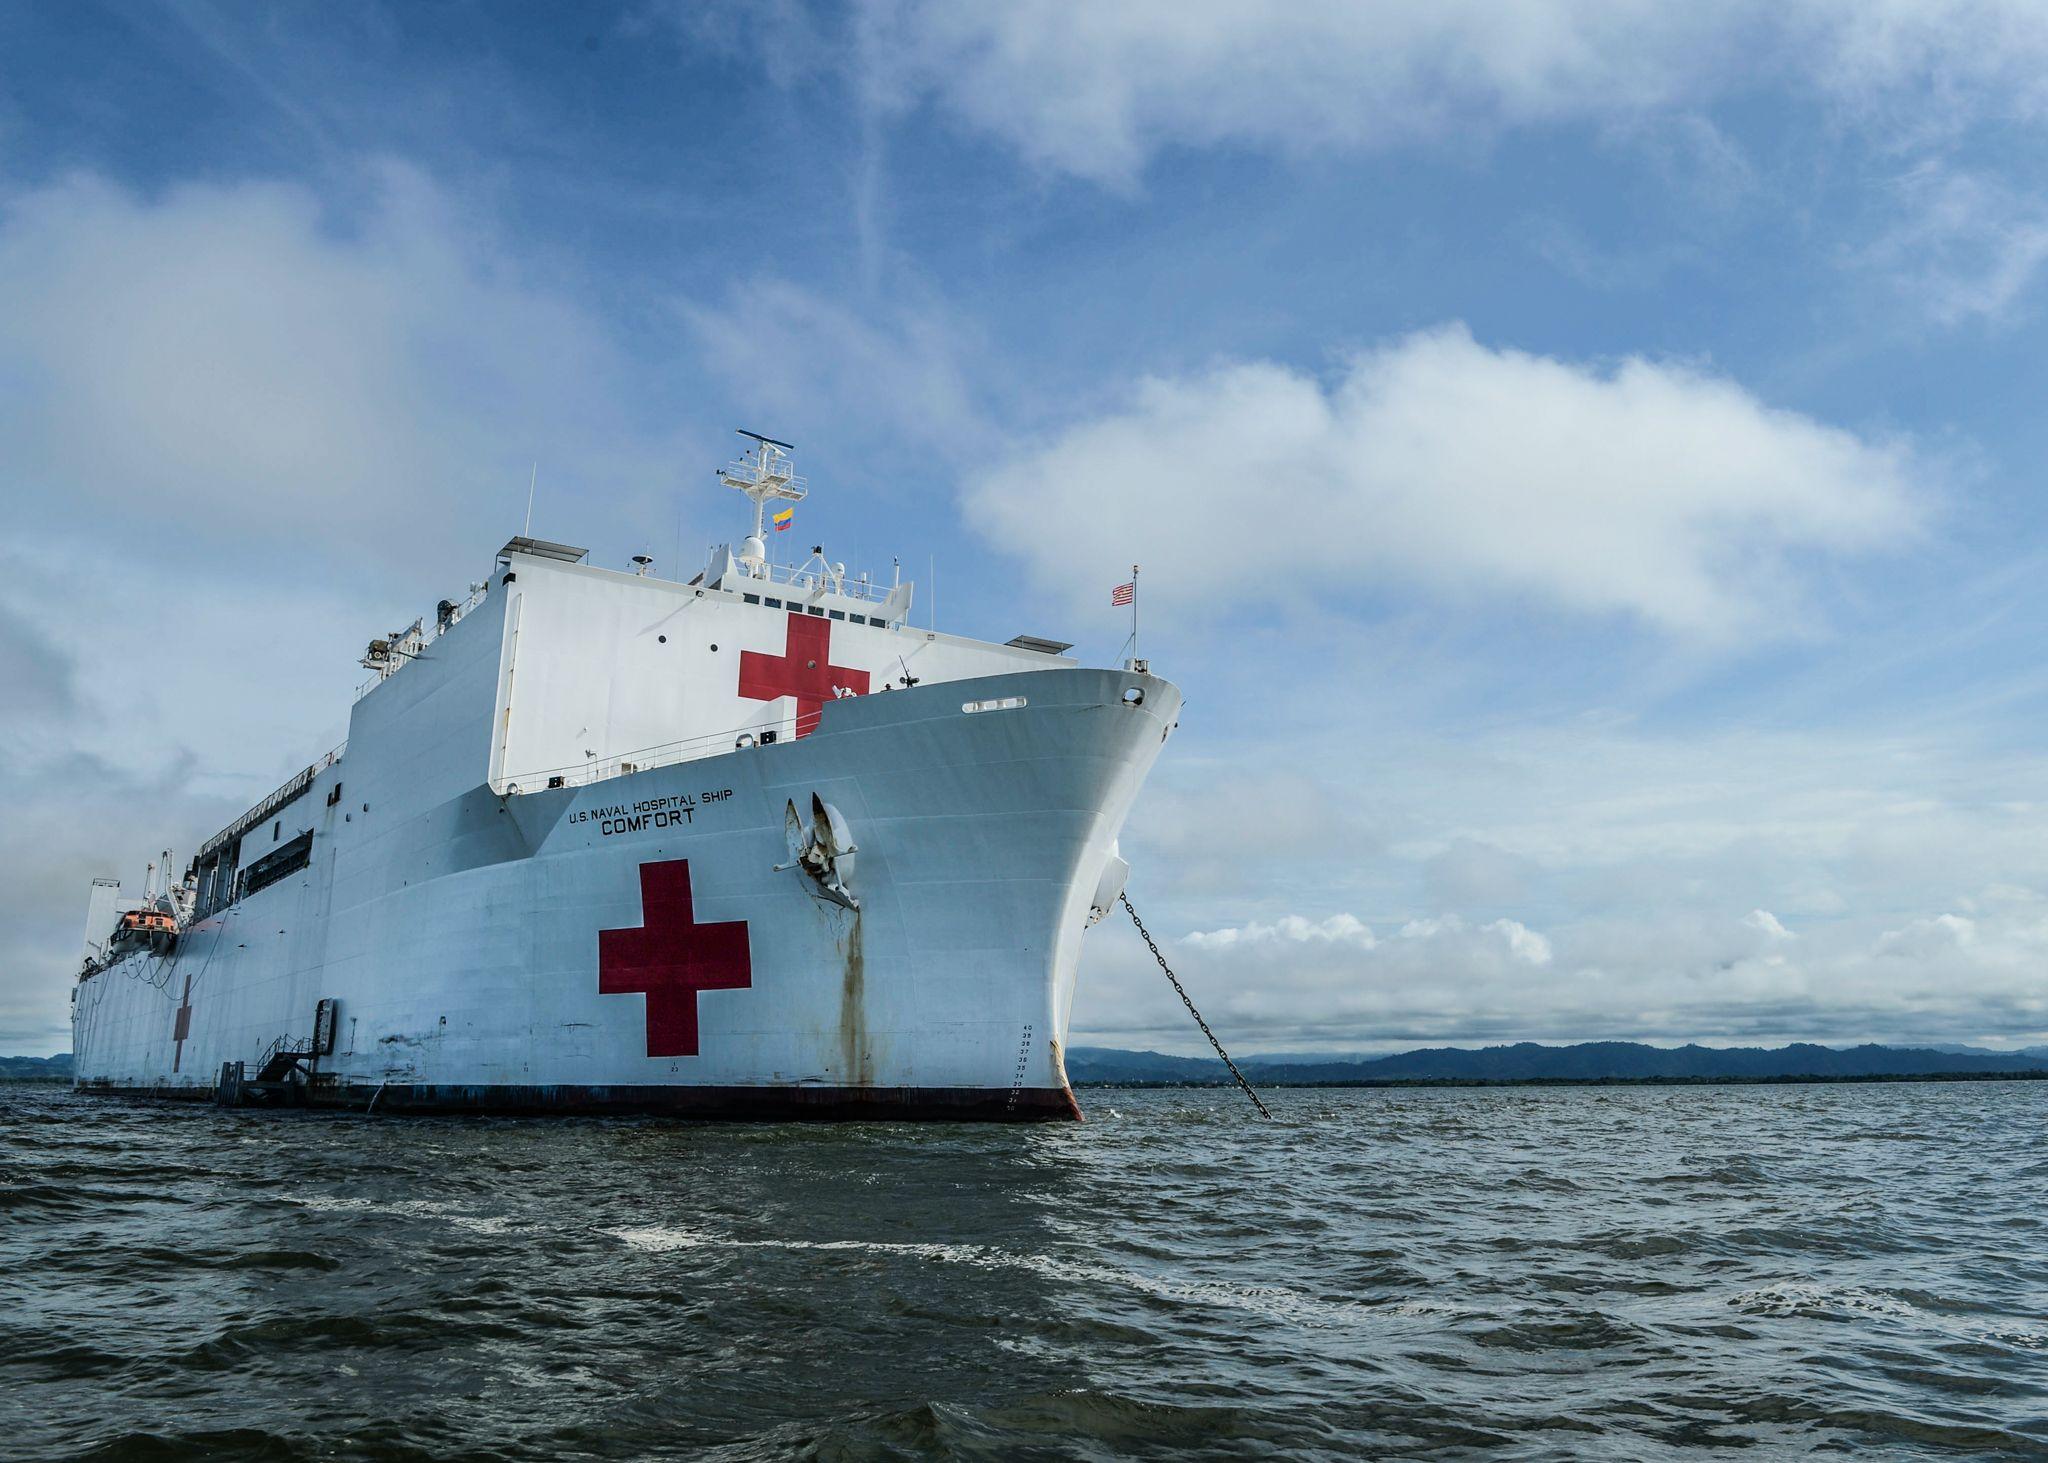 Red and White Ship Logo - U.S. hospital ship provides hope in the Americas | ShareAmerica